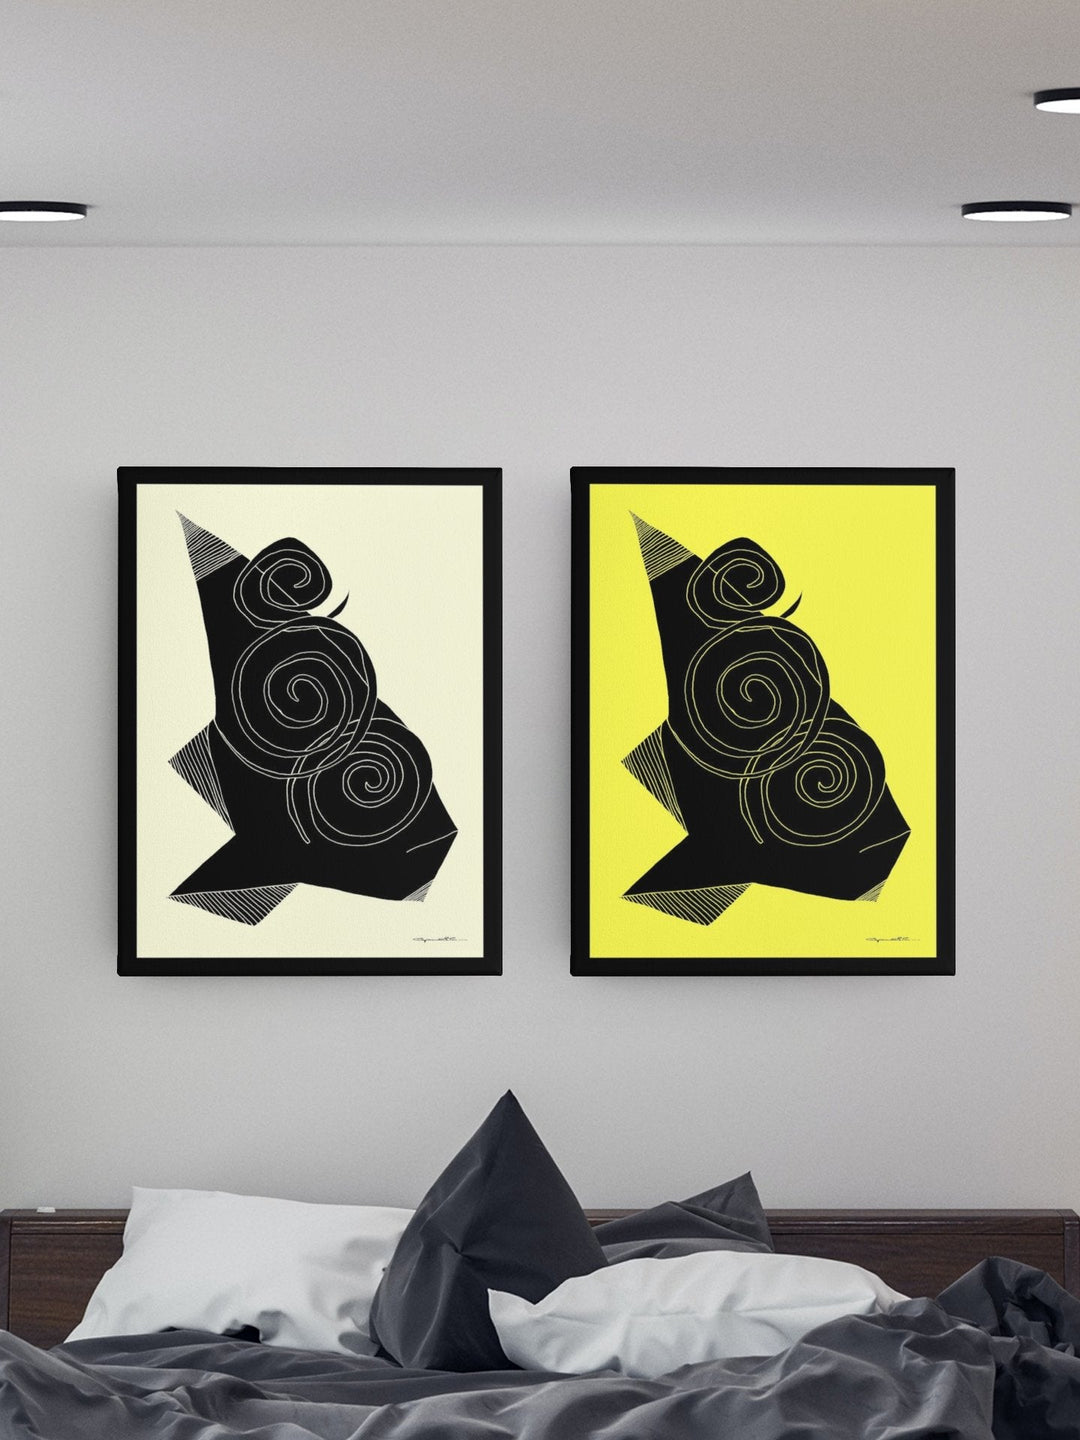 Abstract Wall Art - Bring life and energy to your walls with our colorful canvas abstract wall art collection. It is the perfect solution! Council Color Fill with Black Borders at Miami Abstract Inc.